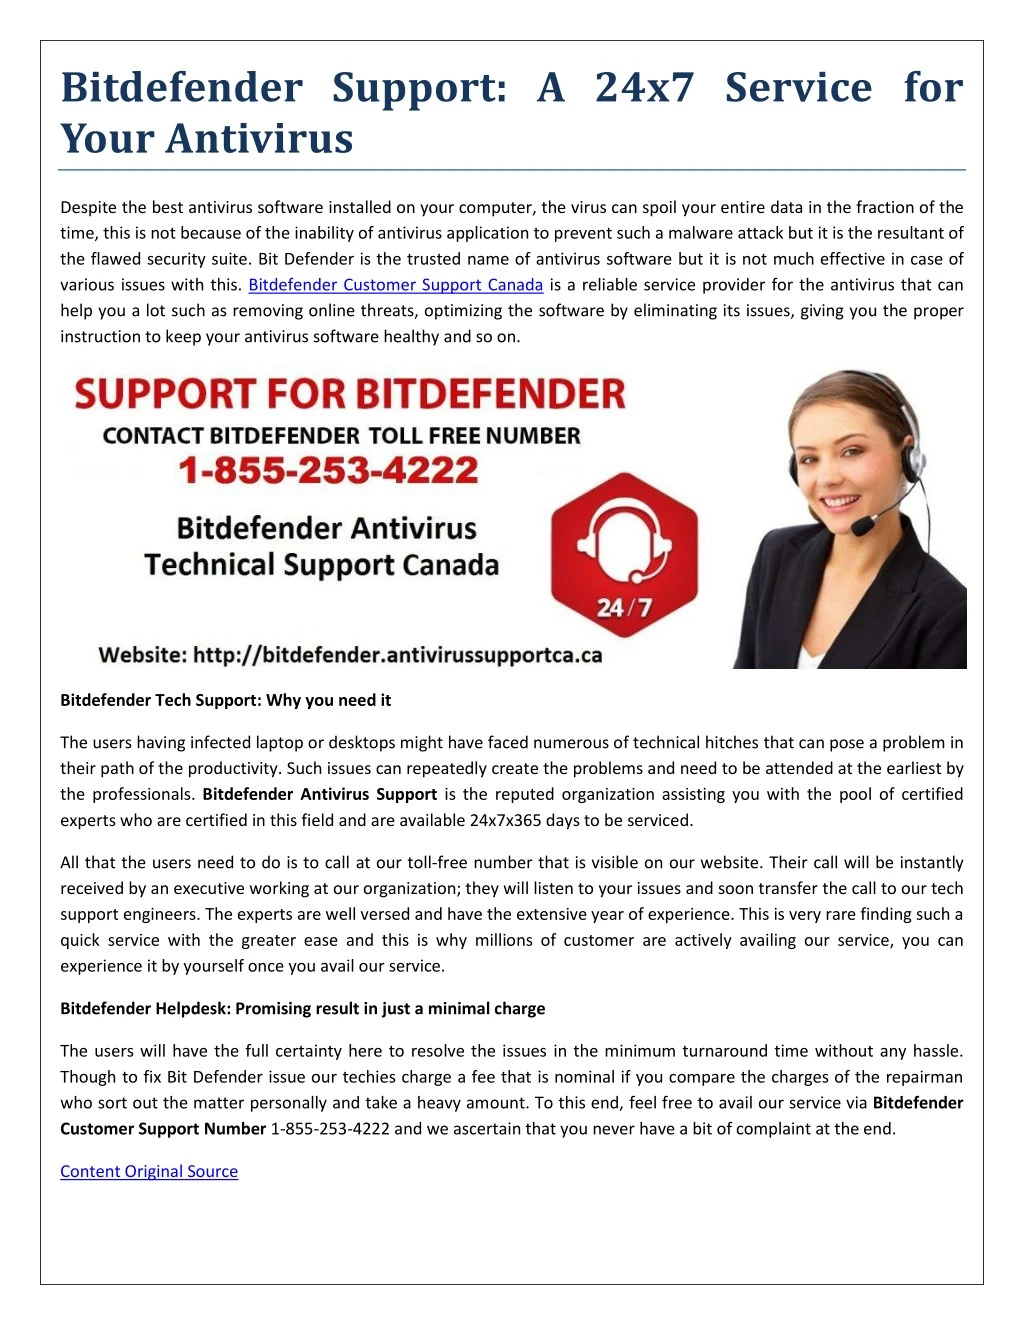 bitdefender support a 24x7 service for your